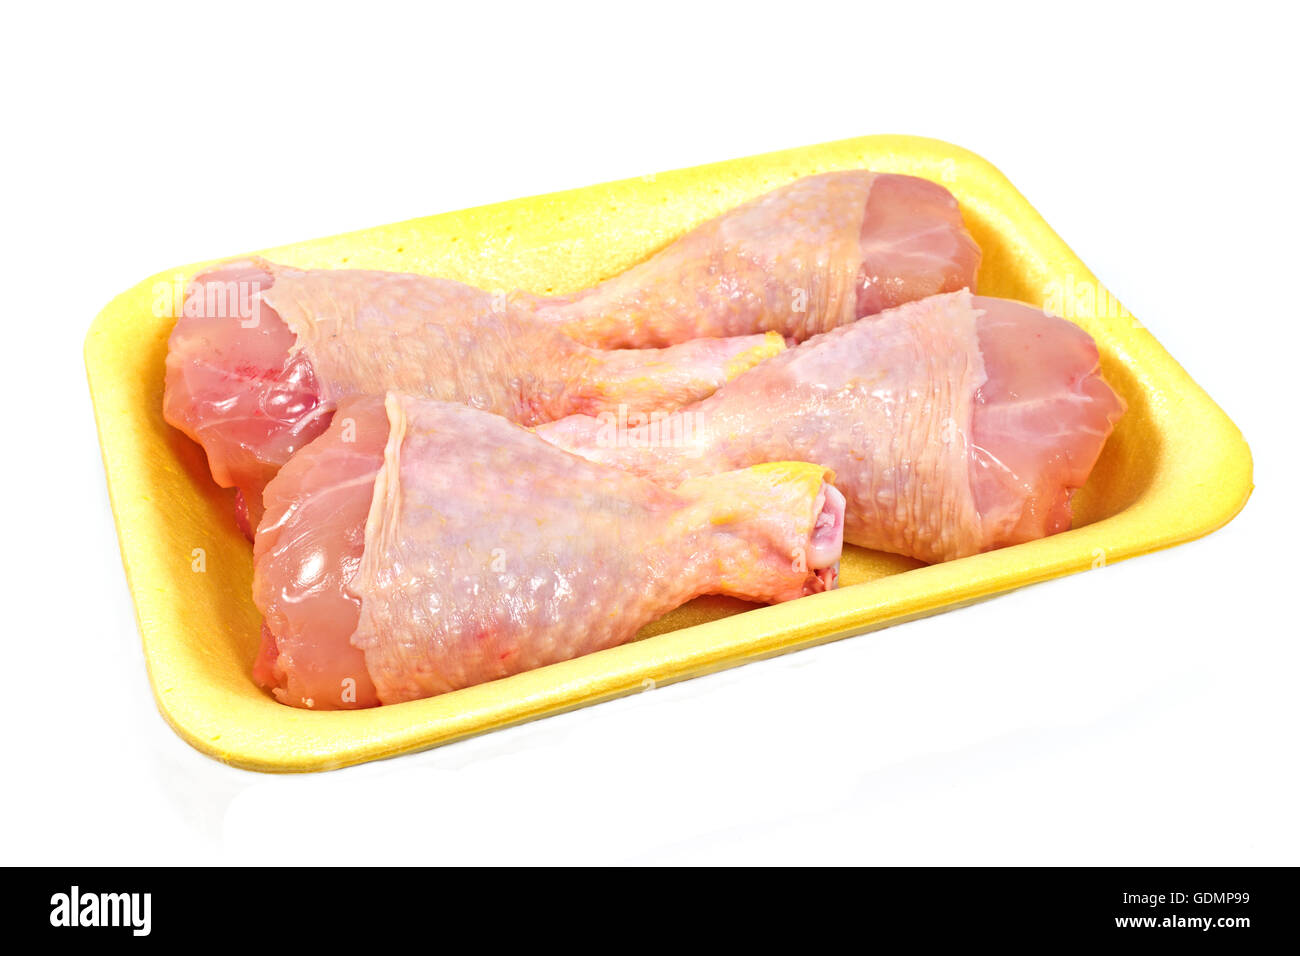 Raw chicken legs in plastic bowl isolated on white Stock Photo